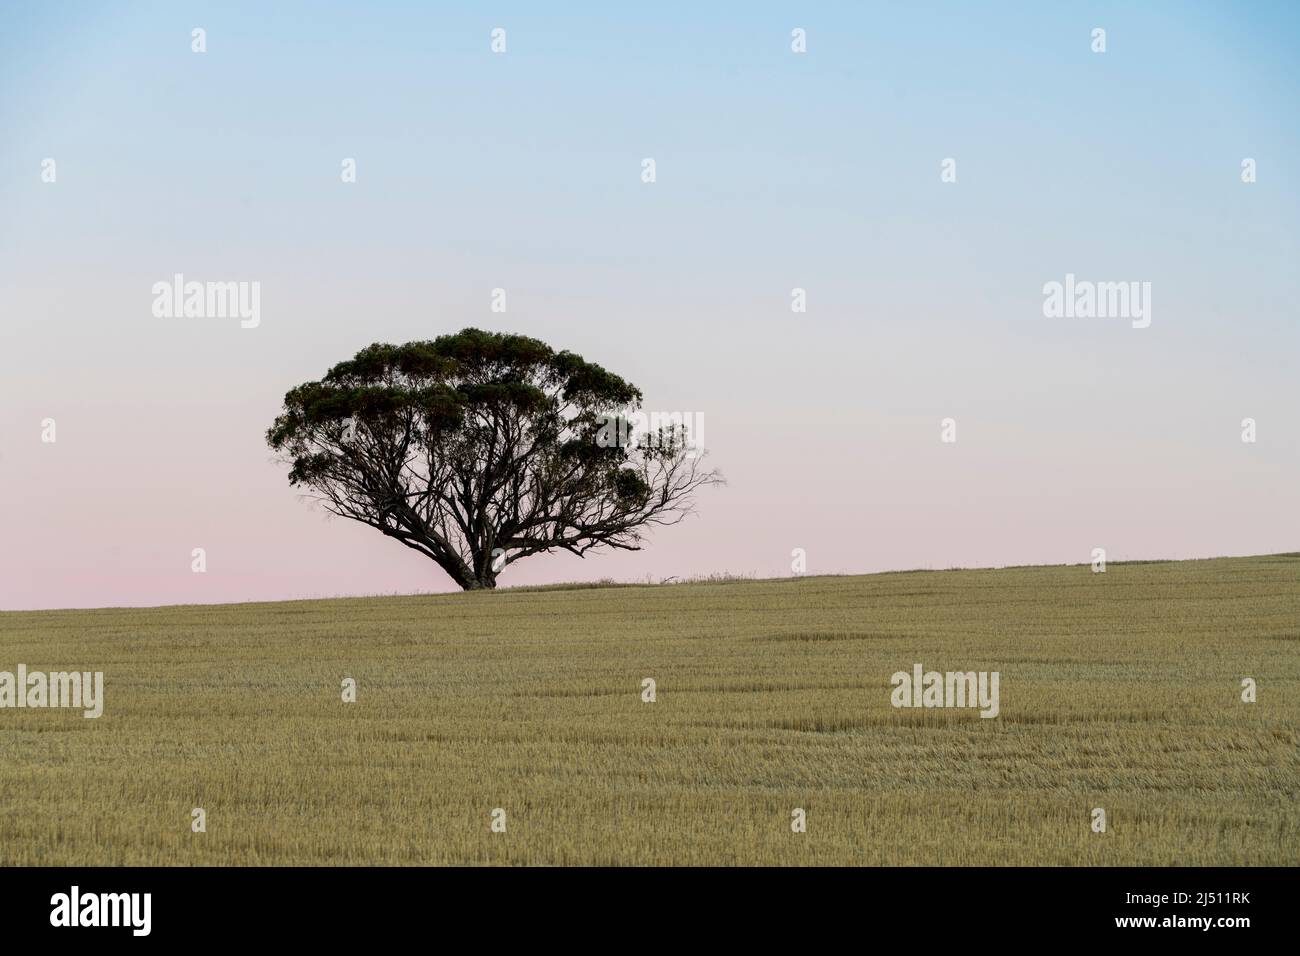 Dusk in the Western Australian wheatbelt after harvest with one tree. Stock Photo